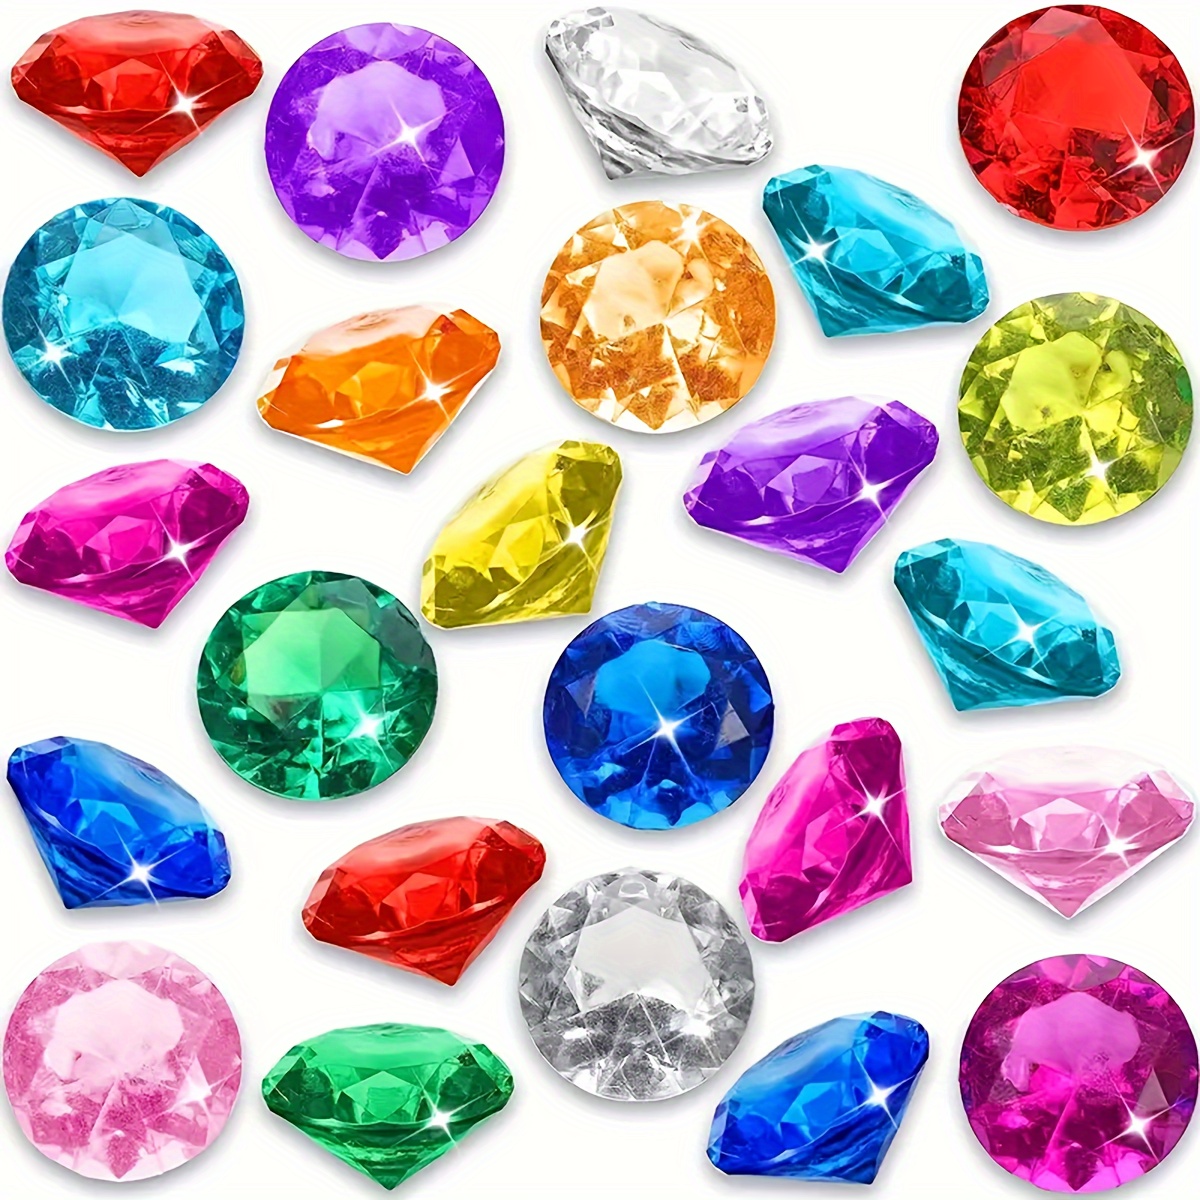 

20/50/100pcs Acrylic Dive Pool Large Assorted Colors Treasure Gems For Pirate Chest, Summer Underwater Swimming Beads, Birthday Party Pool Favors Decors